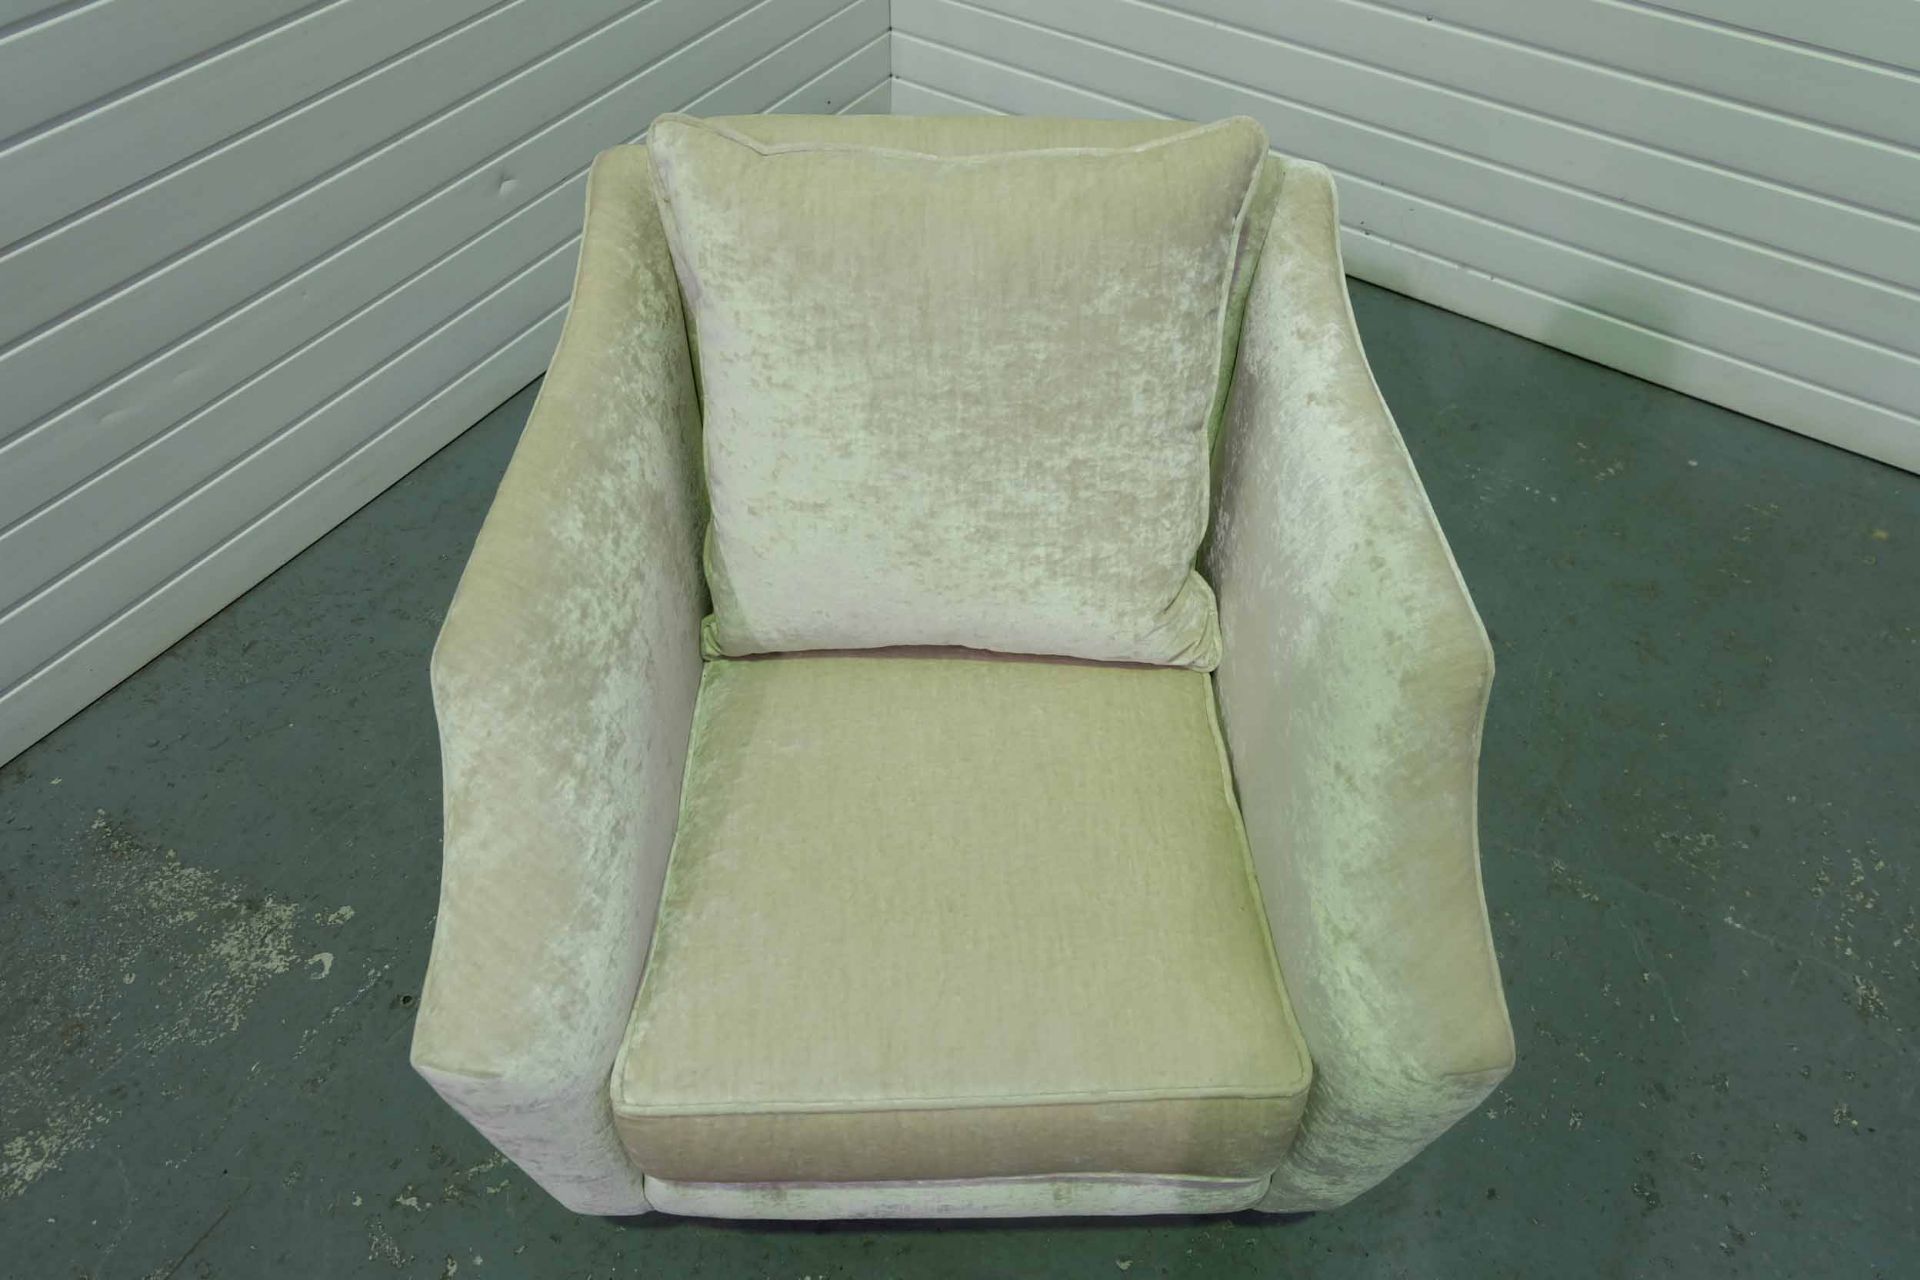 Steed Upholstery 'Hockley' Range Fully Handmade Chair. With Castor Wheels to the Front of the Chair. - Image 4 of 4